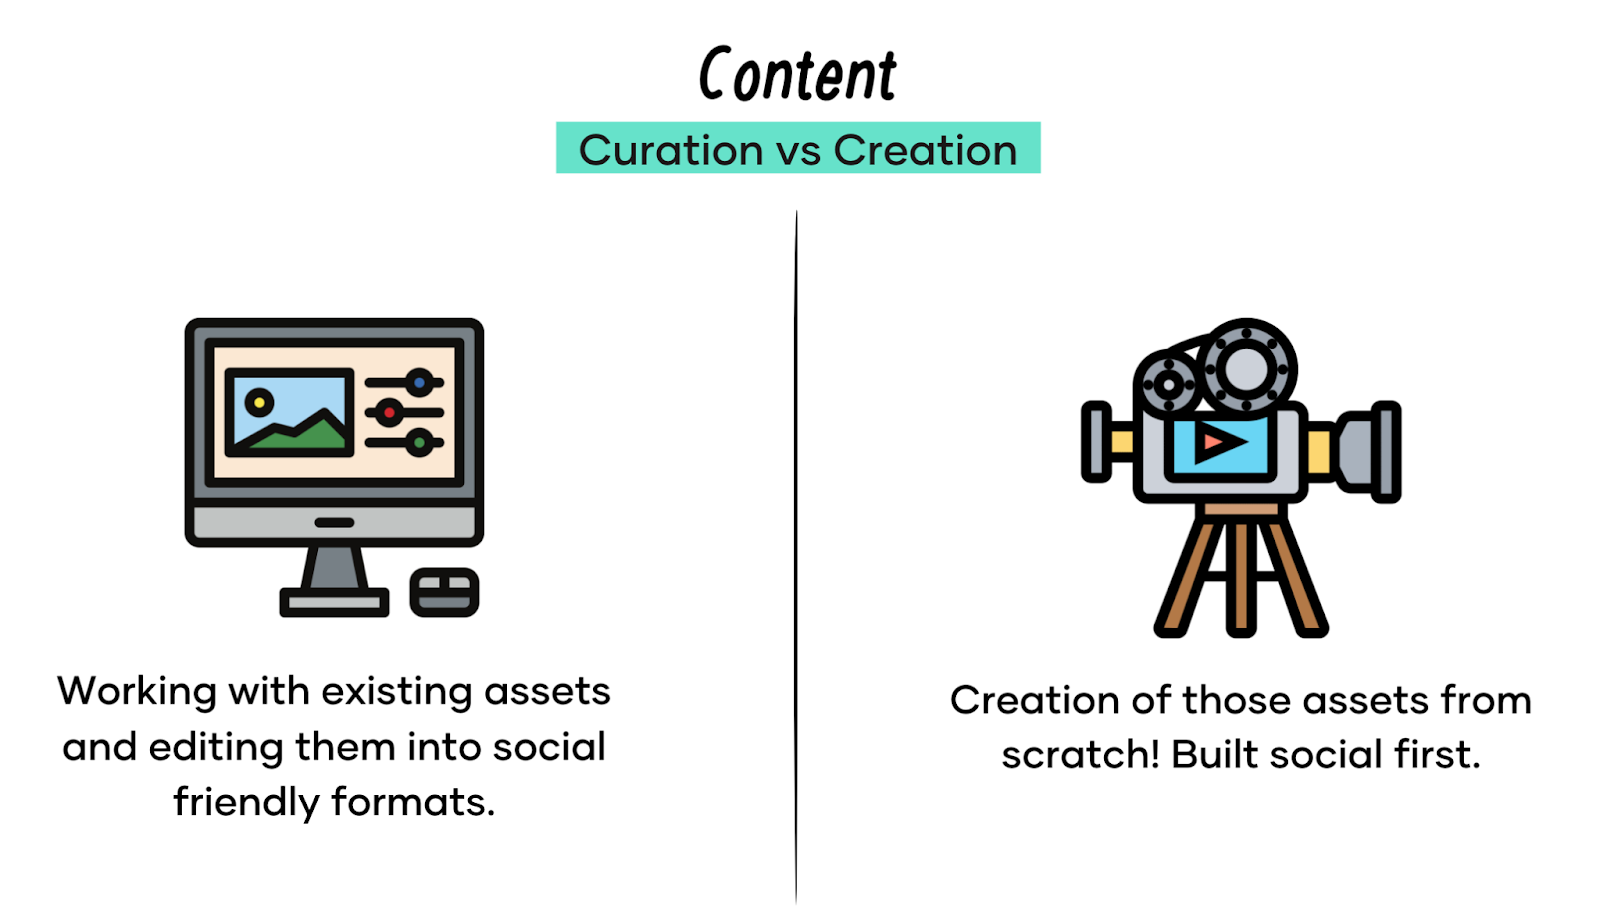 Content Creation vs Curation